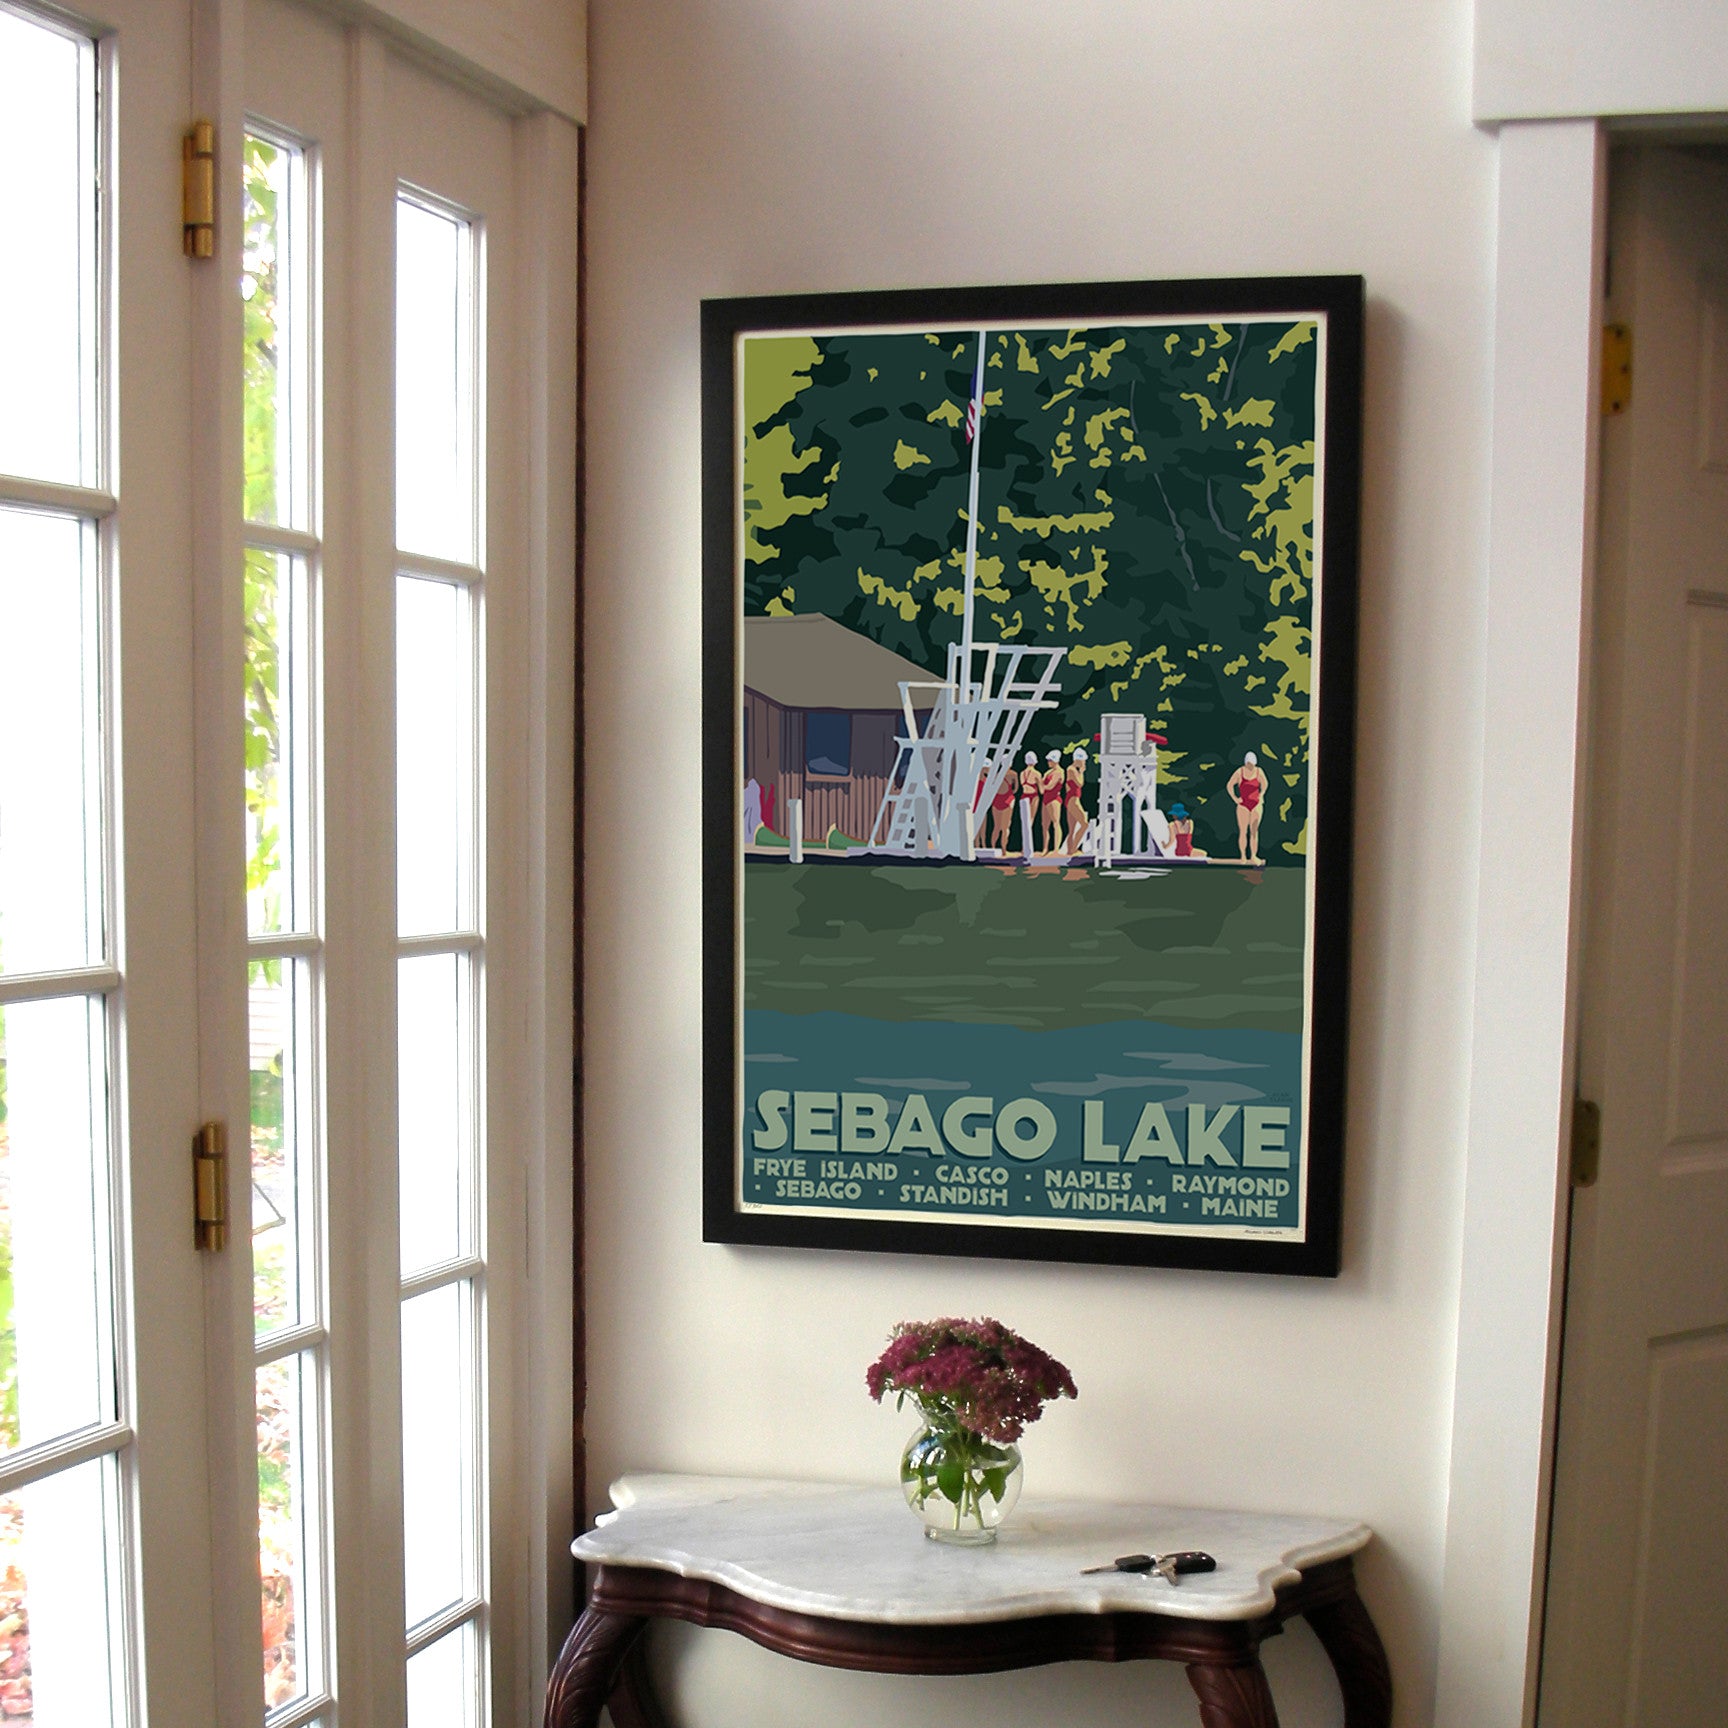 Sebago Lake Swimmers Art Print 24" x 36" Framed Travel Poster By Alan Claude - Maine